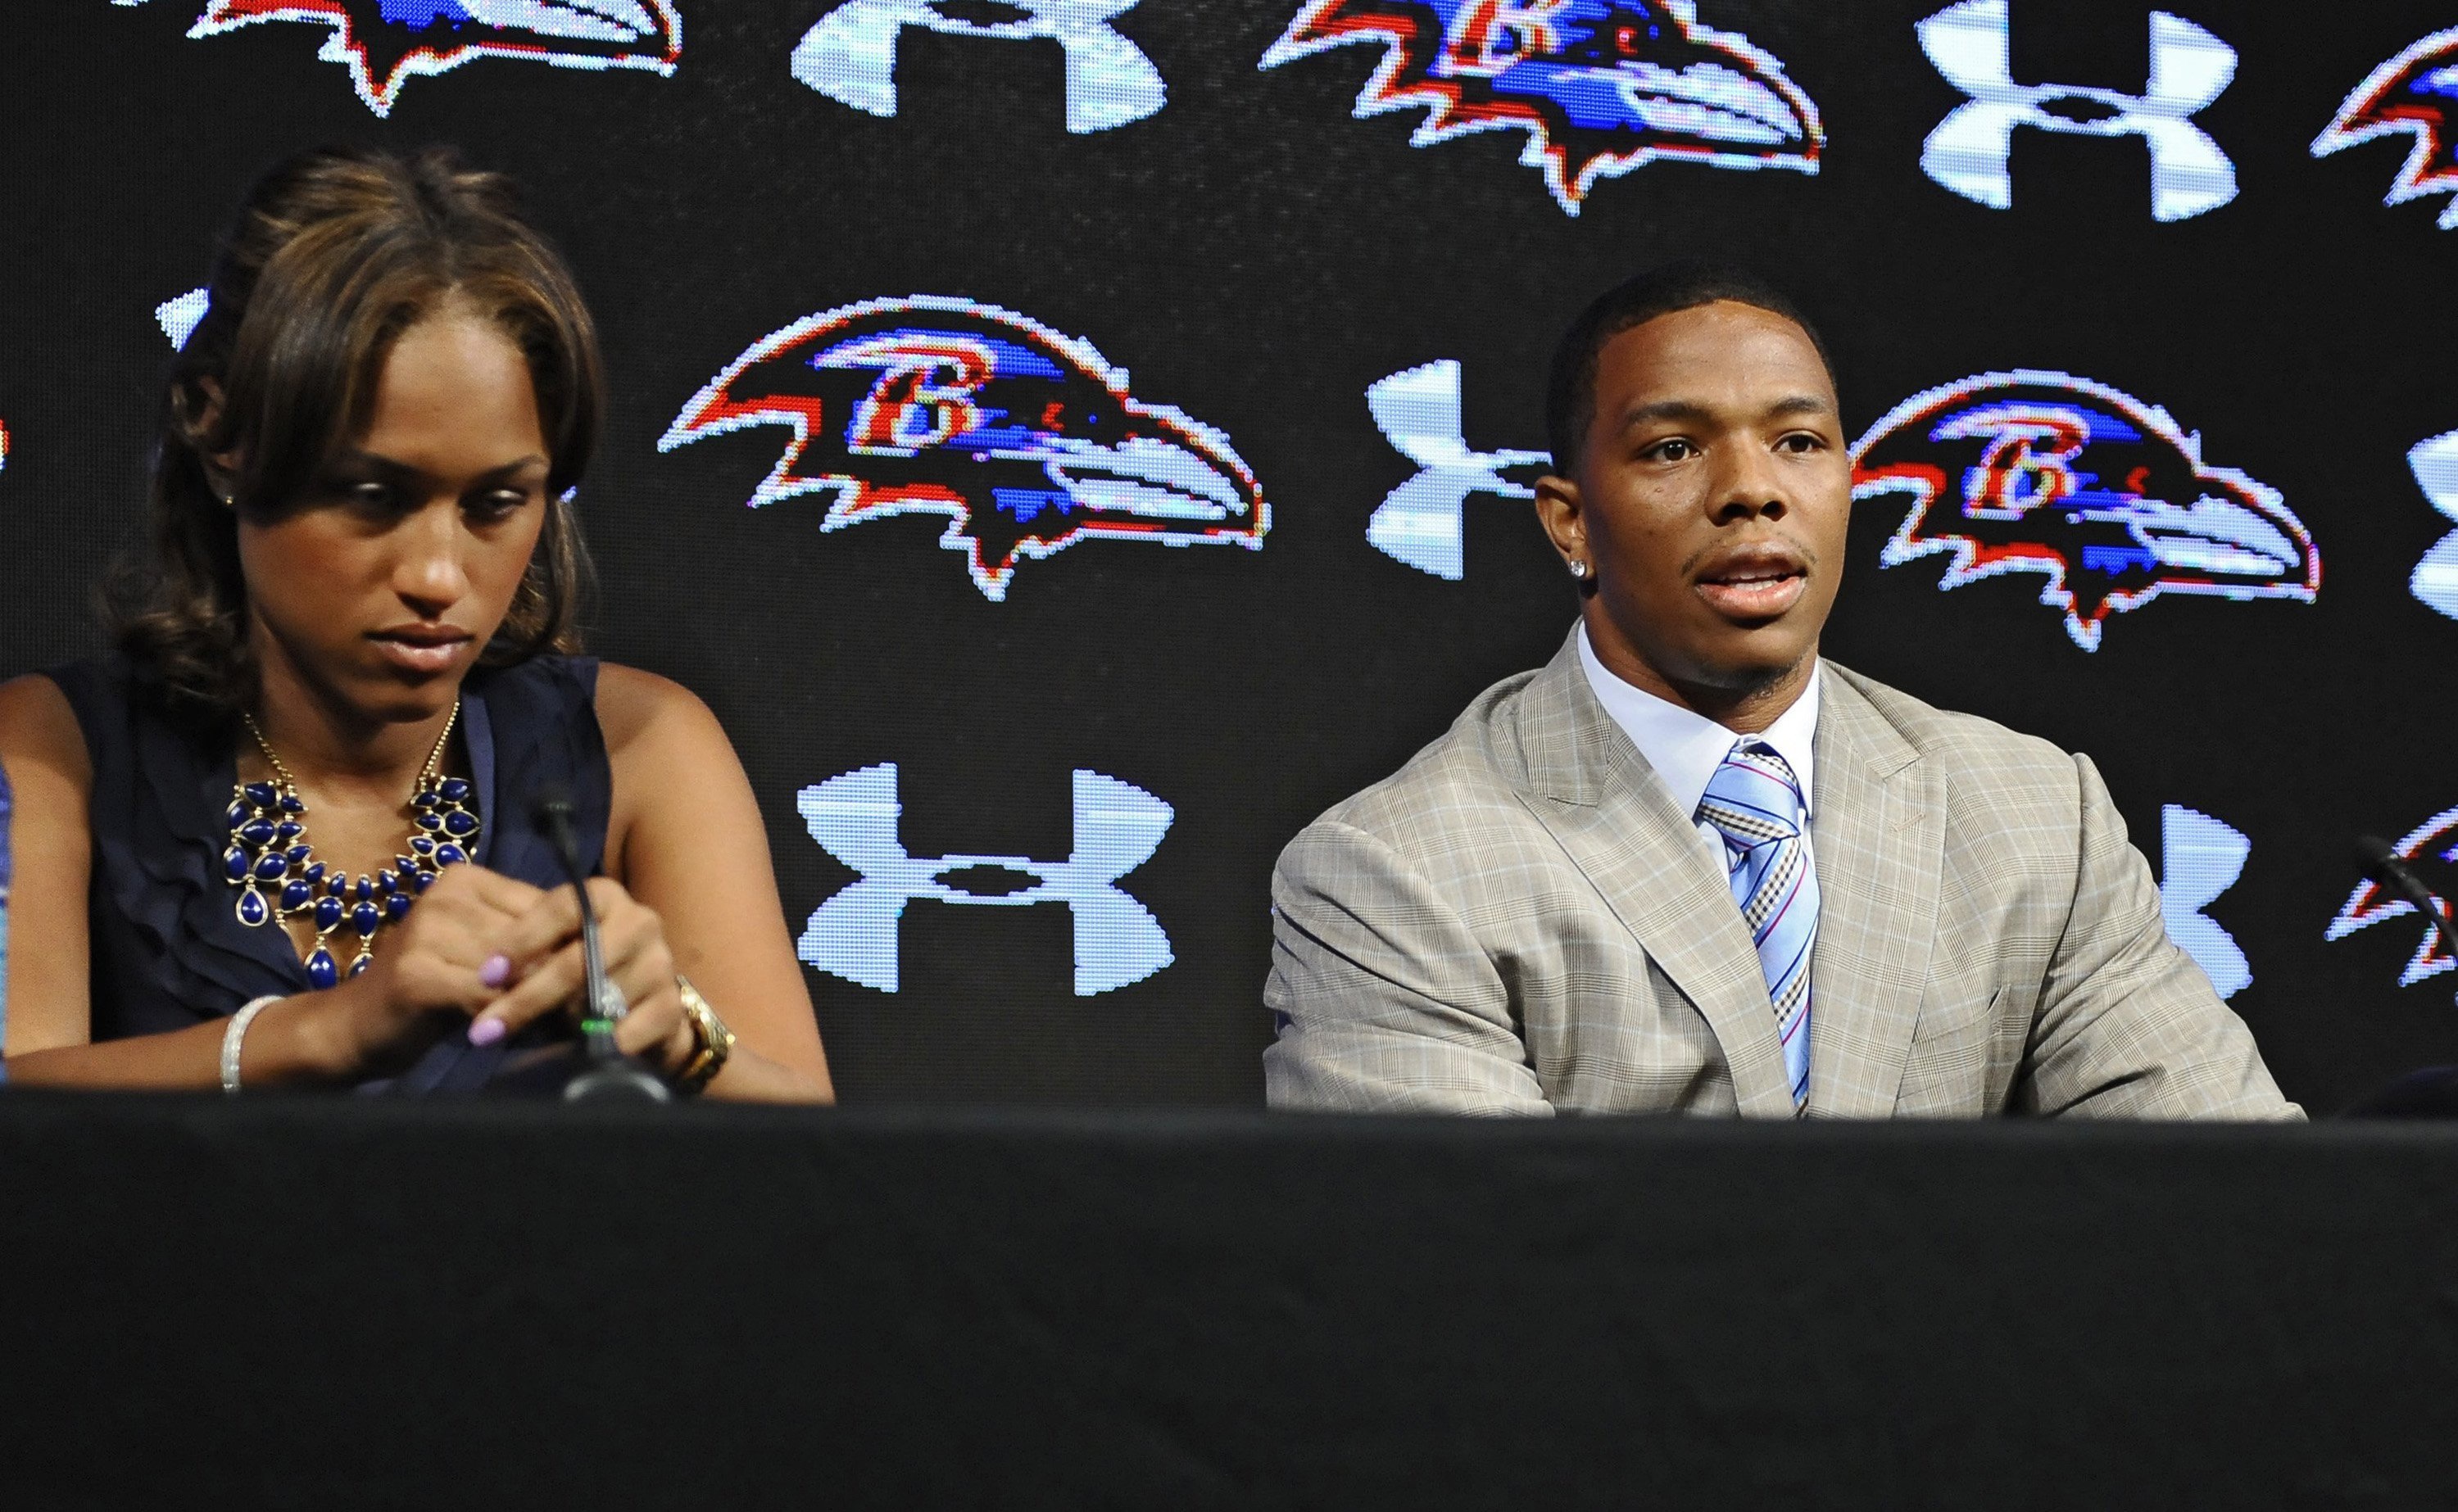 Ravens running back Ray Rice, right, and his wife Janay made statements to the news media regarding his assault charge for knocking her unconscious in a New Jersey casino, on May 5, 2014, at the Under Armour Performance Center in Owings Mills, Md. (Kenneth K. Lam—Baltimore Sun/MCT/Getty Images)